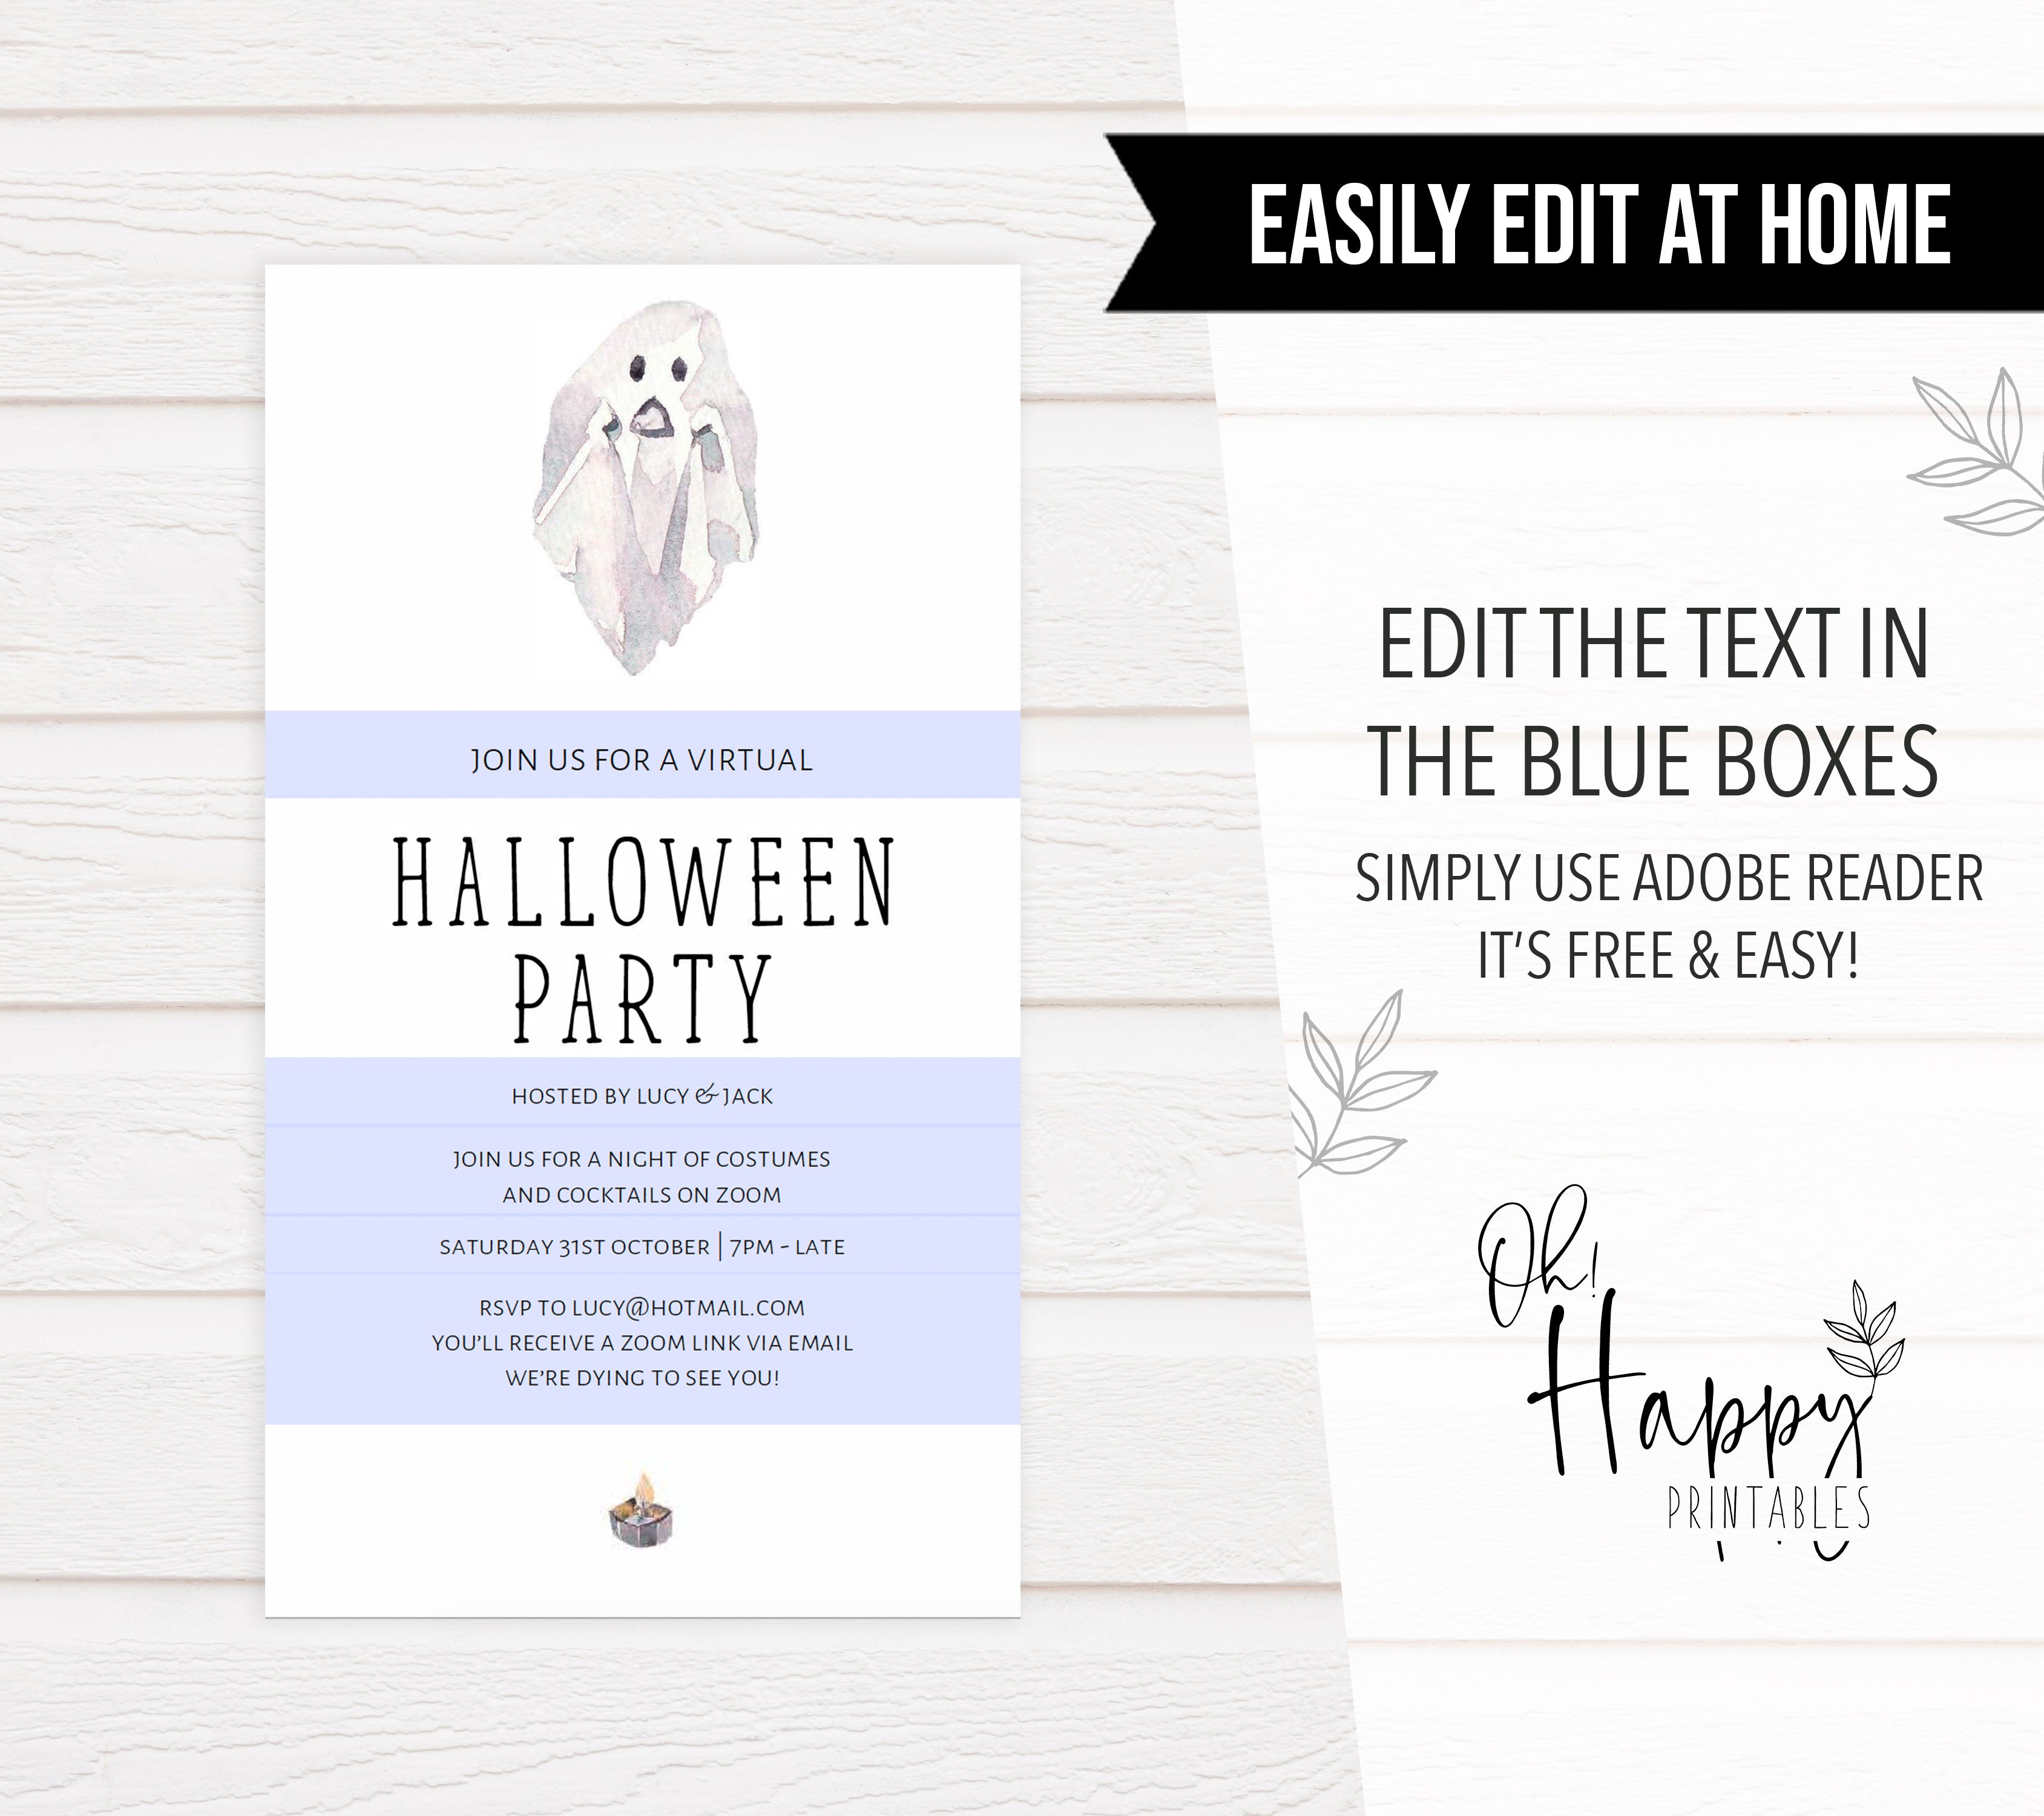 virtual halloween invitation, halloween invitations, editable halloween invitations, cell phone halloween invitations, spooky halloween invitations, drink up witches